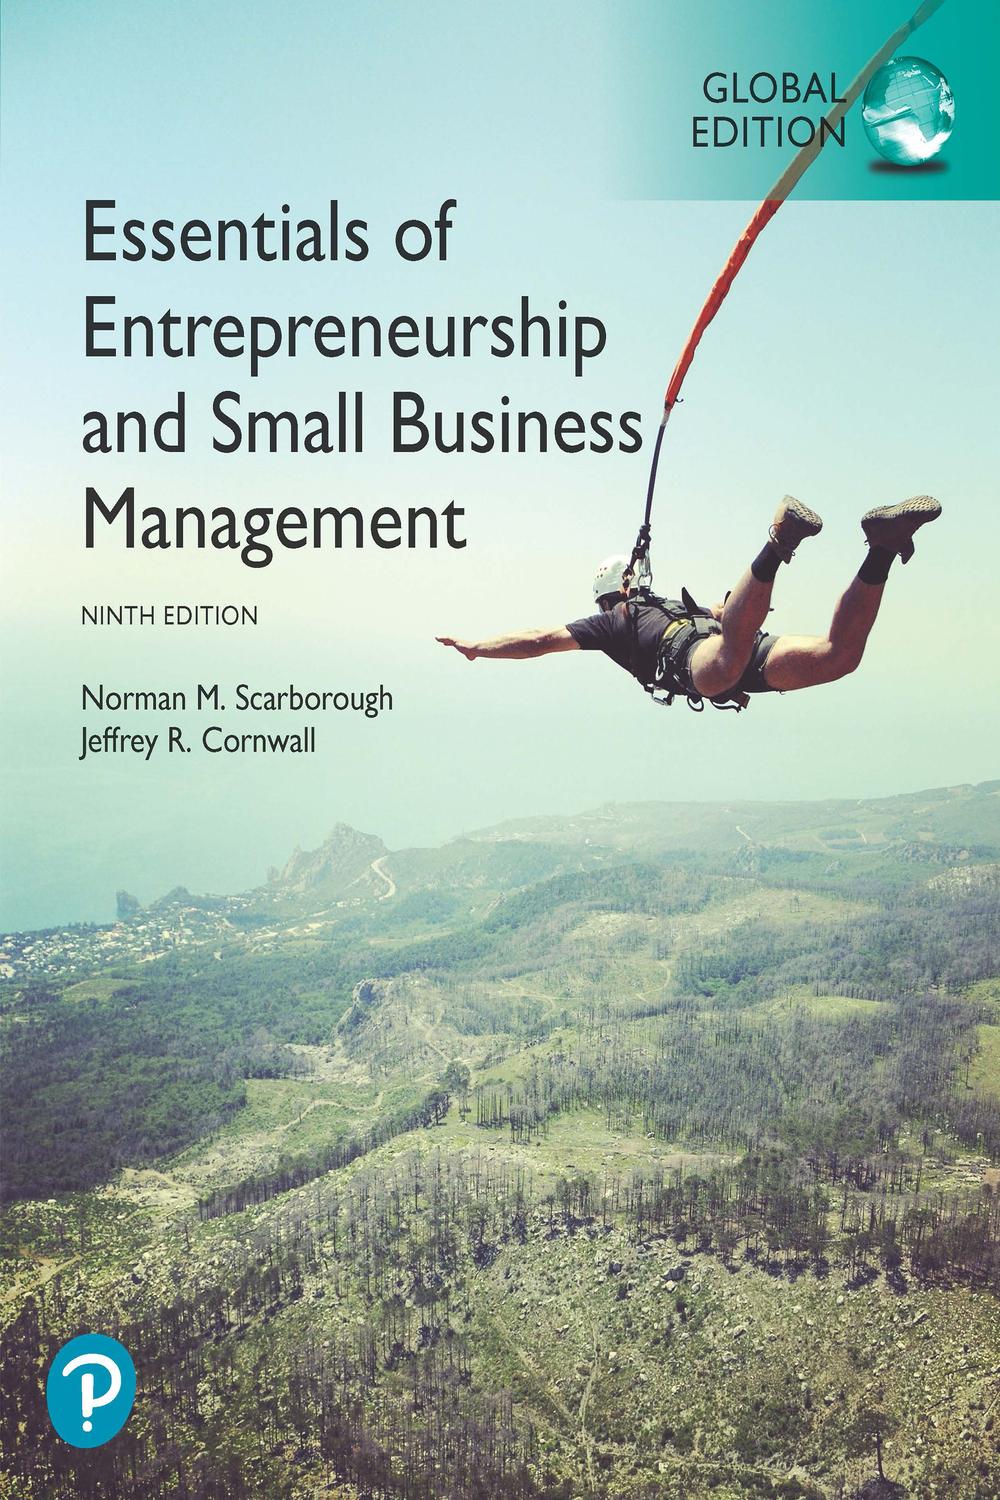 article review entrepreneurship and small business management